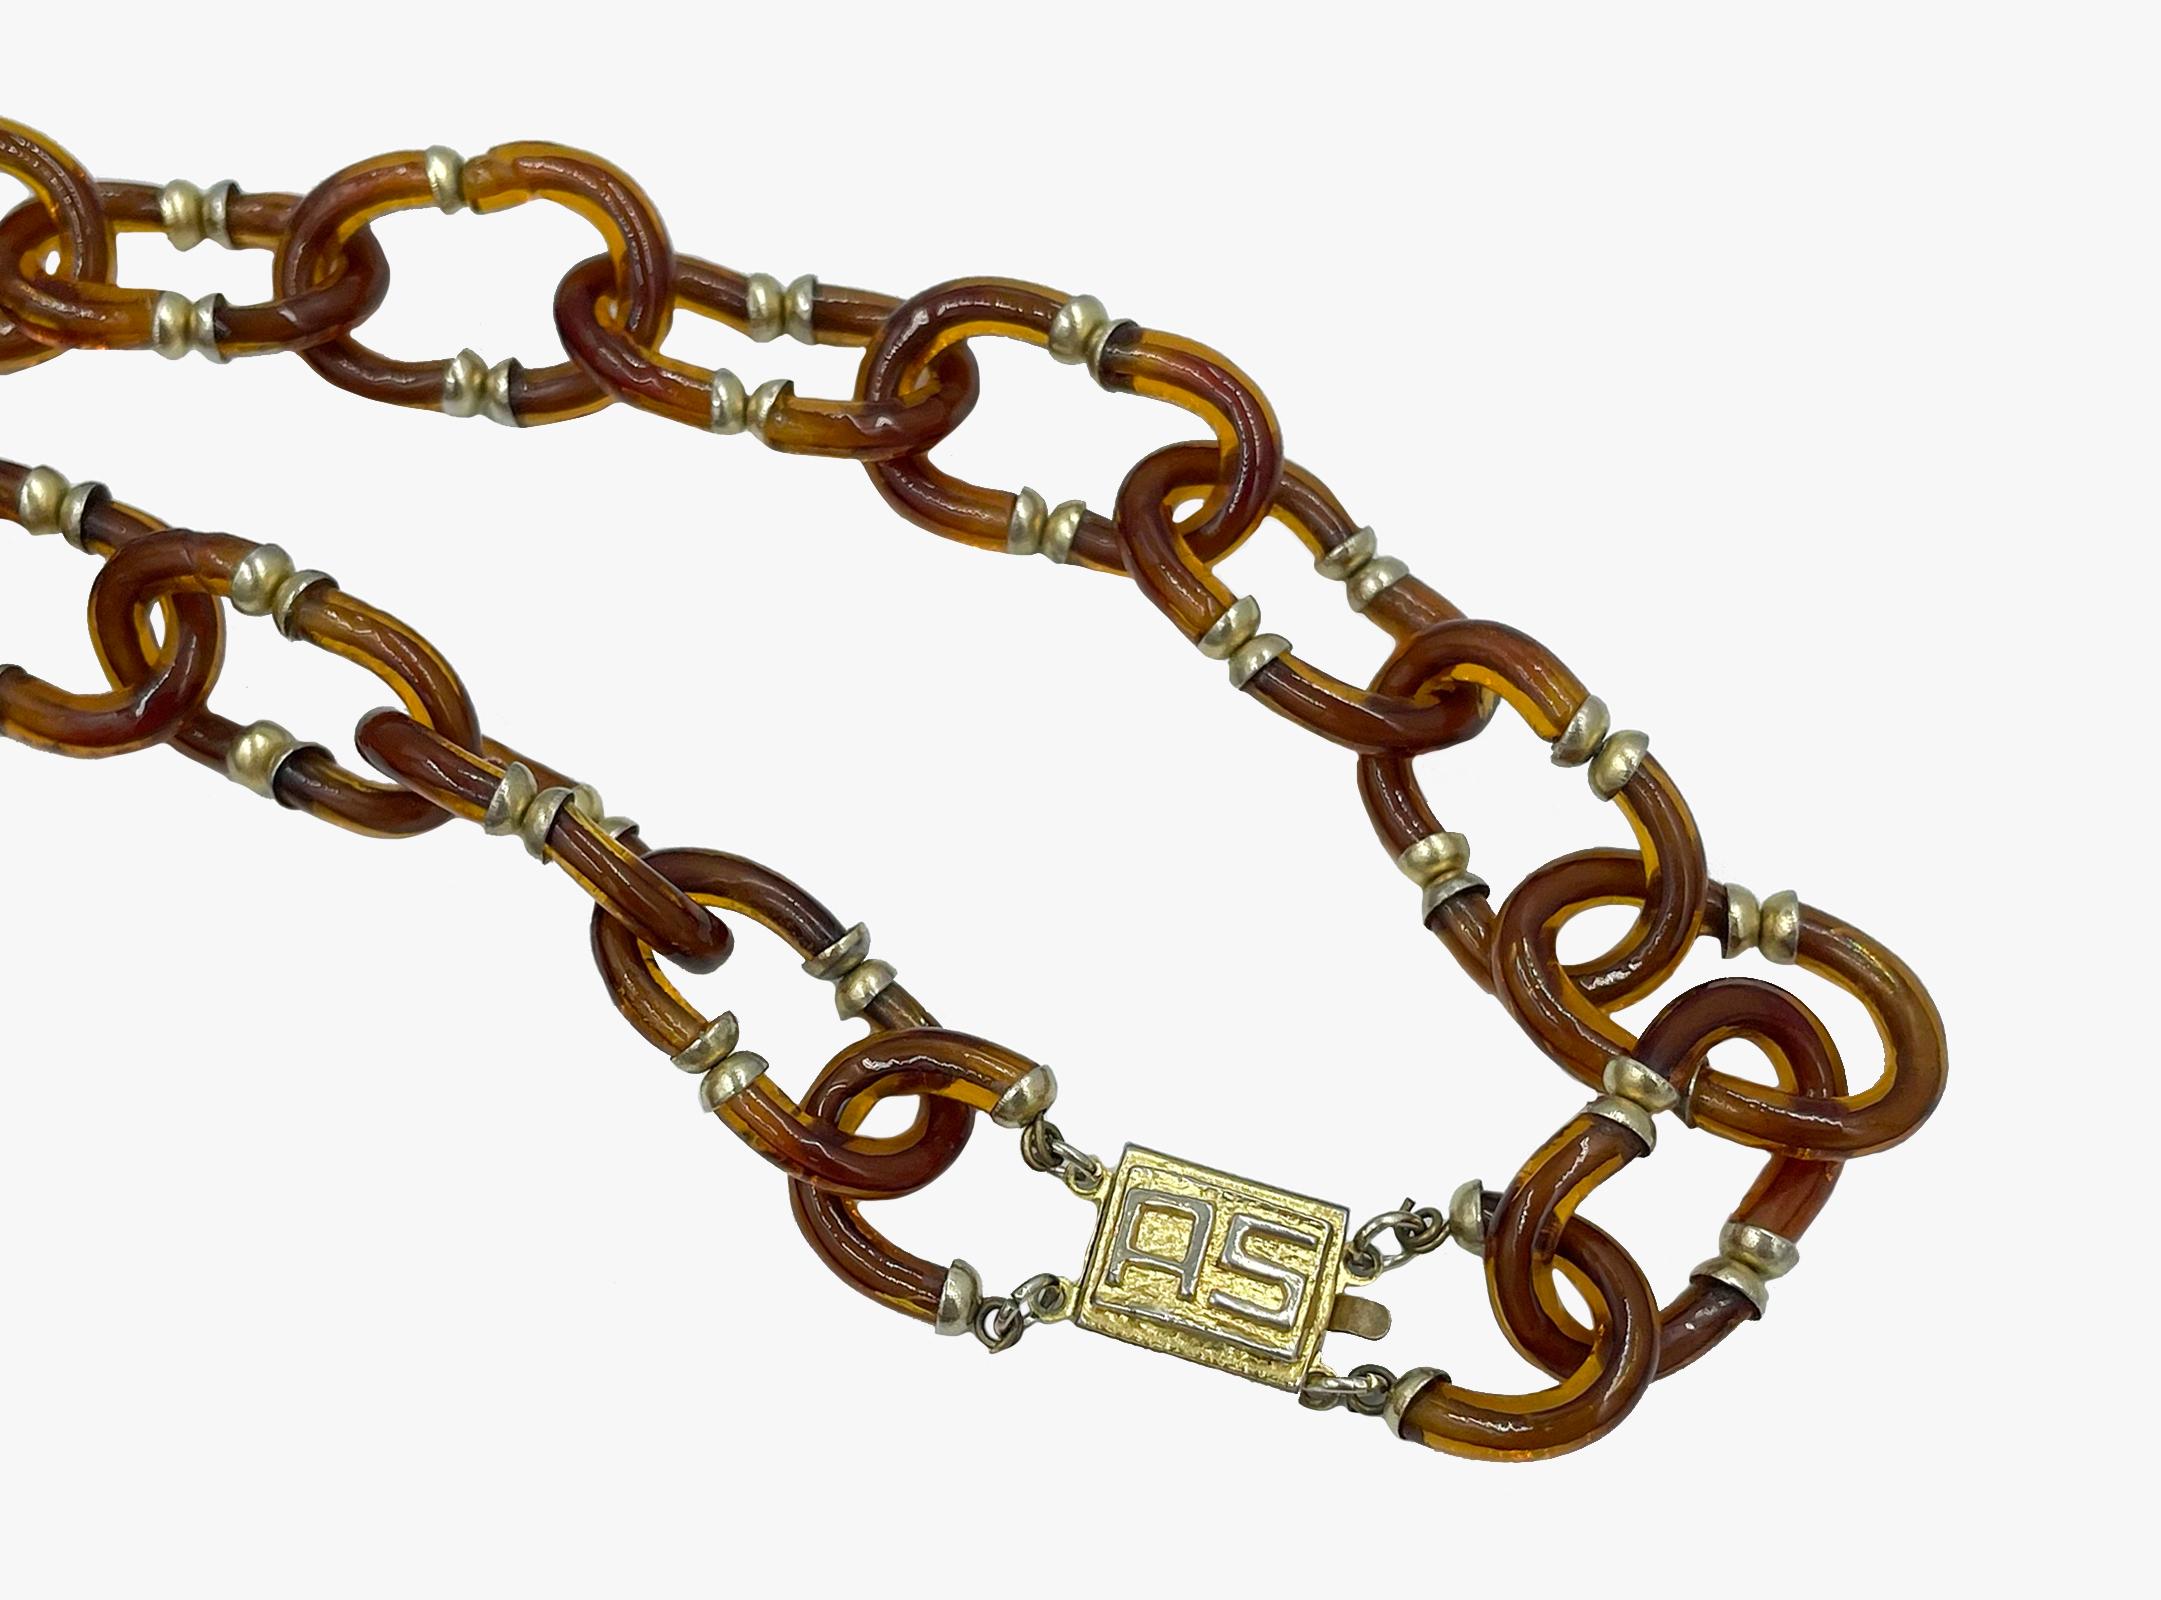 Vintage necklace designed by Archimede Seguso in collaboration with Coco Chanel. The glass “C” shape links create an interlocking Chanel CC logo.

The chain made from murano glass in brown colour. Chain links are fastened with brass and randomly